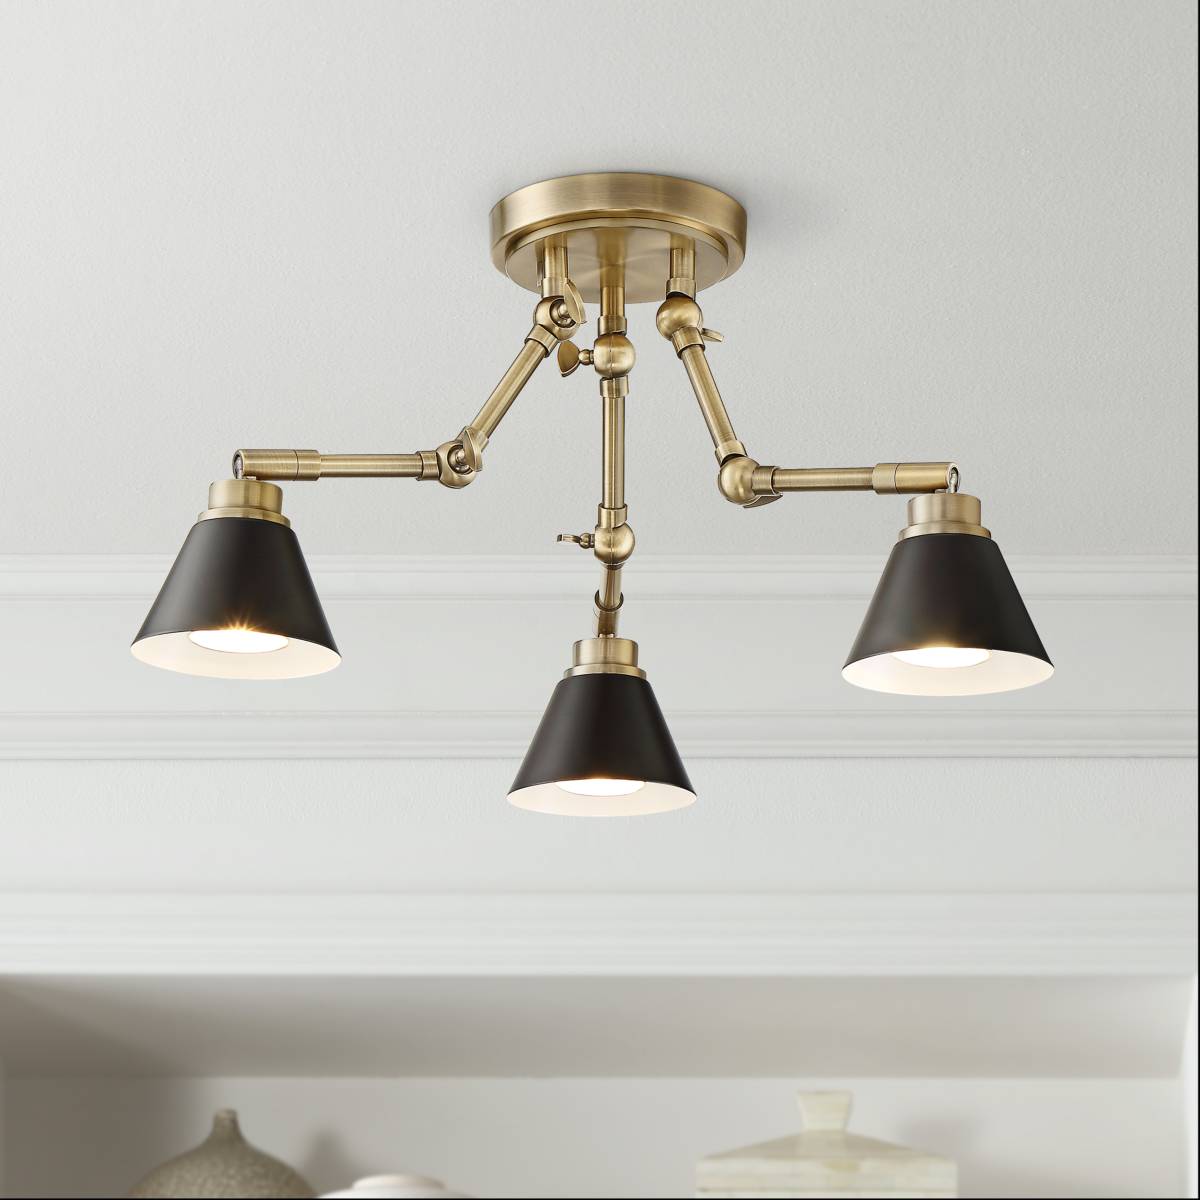 Brass - Antique Brass, Complete Track Kits, Track Lighting | Lamps Plus